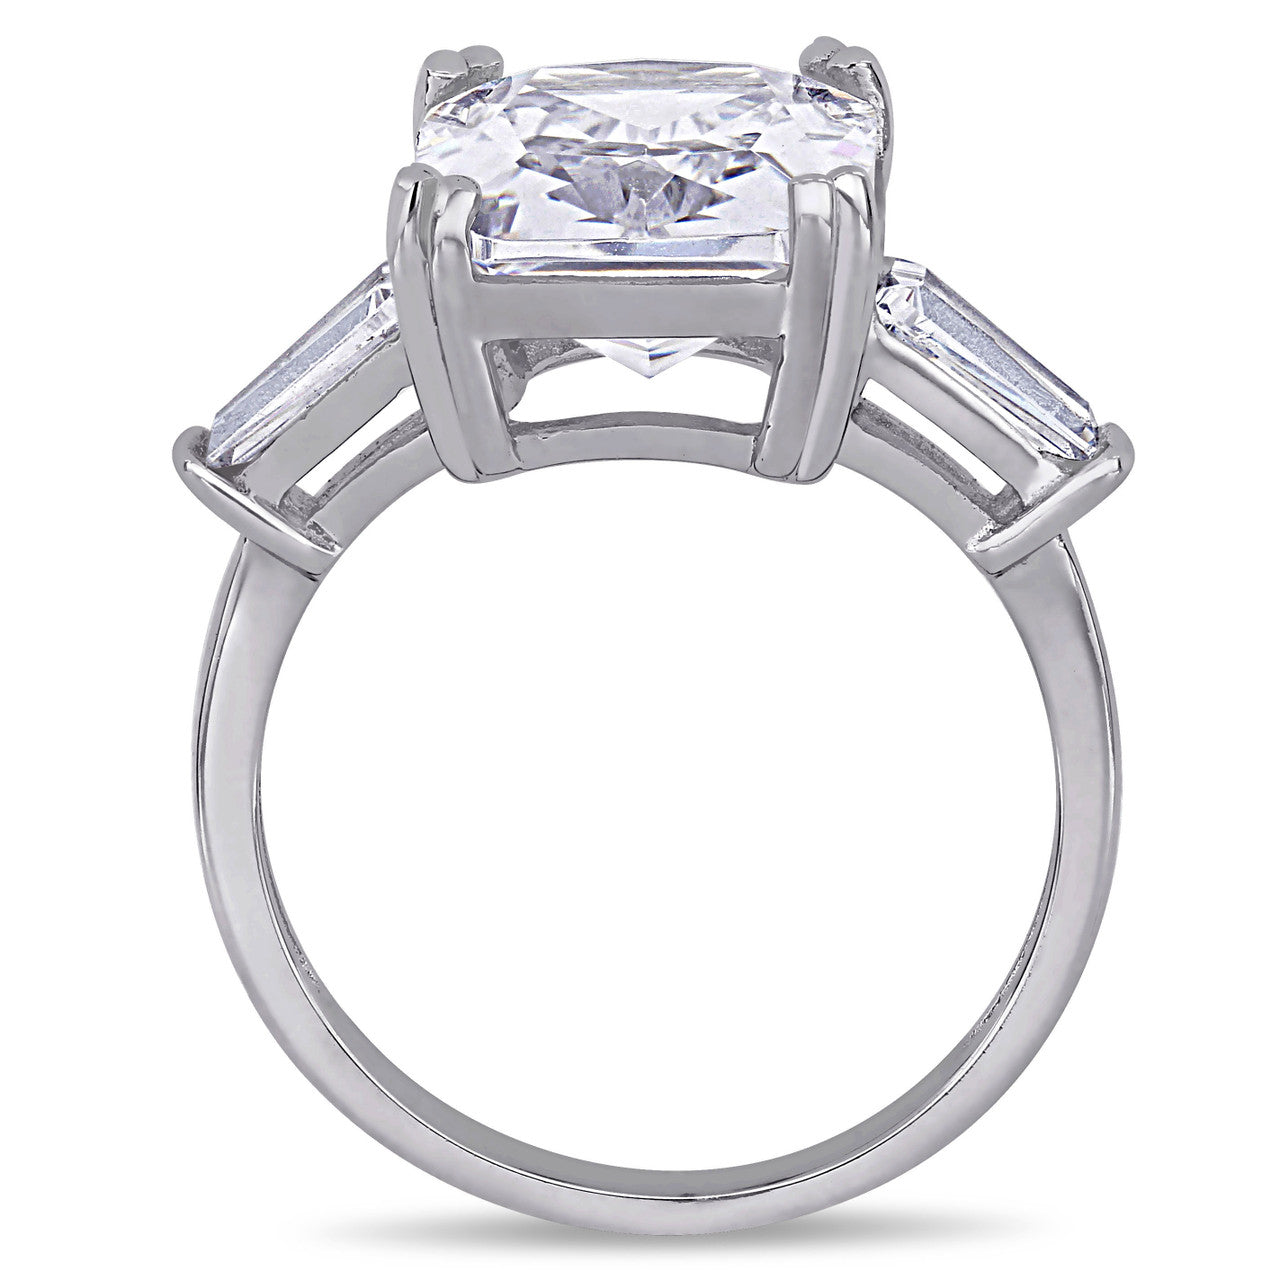 Ice Jewellery 11ct Cubic Zirconia Cocktail Ring in Sterling Silver - 75000004622 | Ice Jewellery Australia